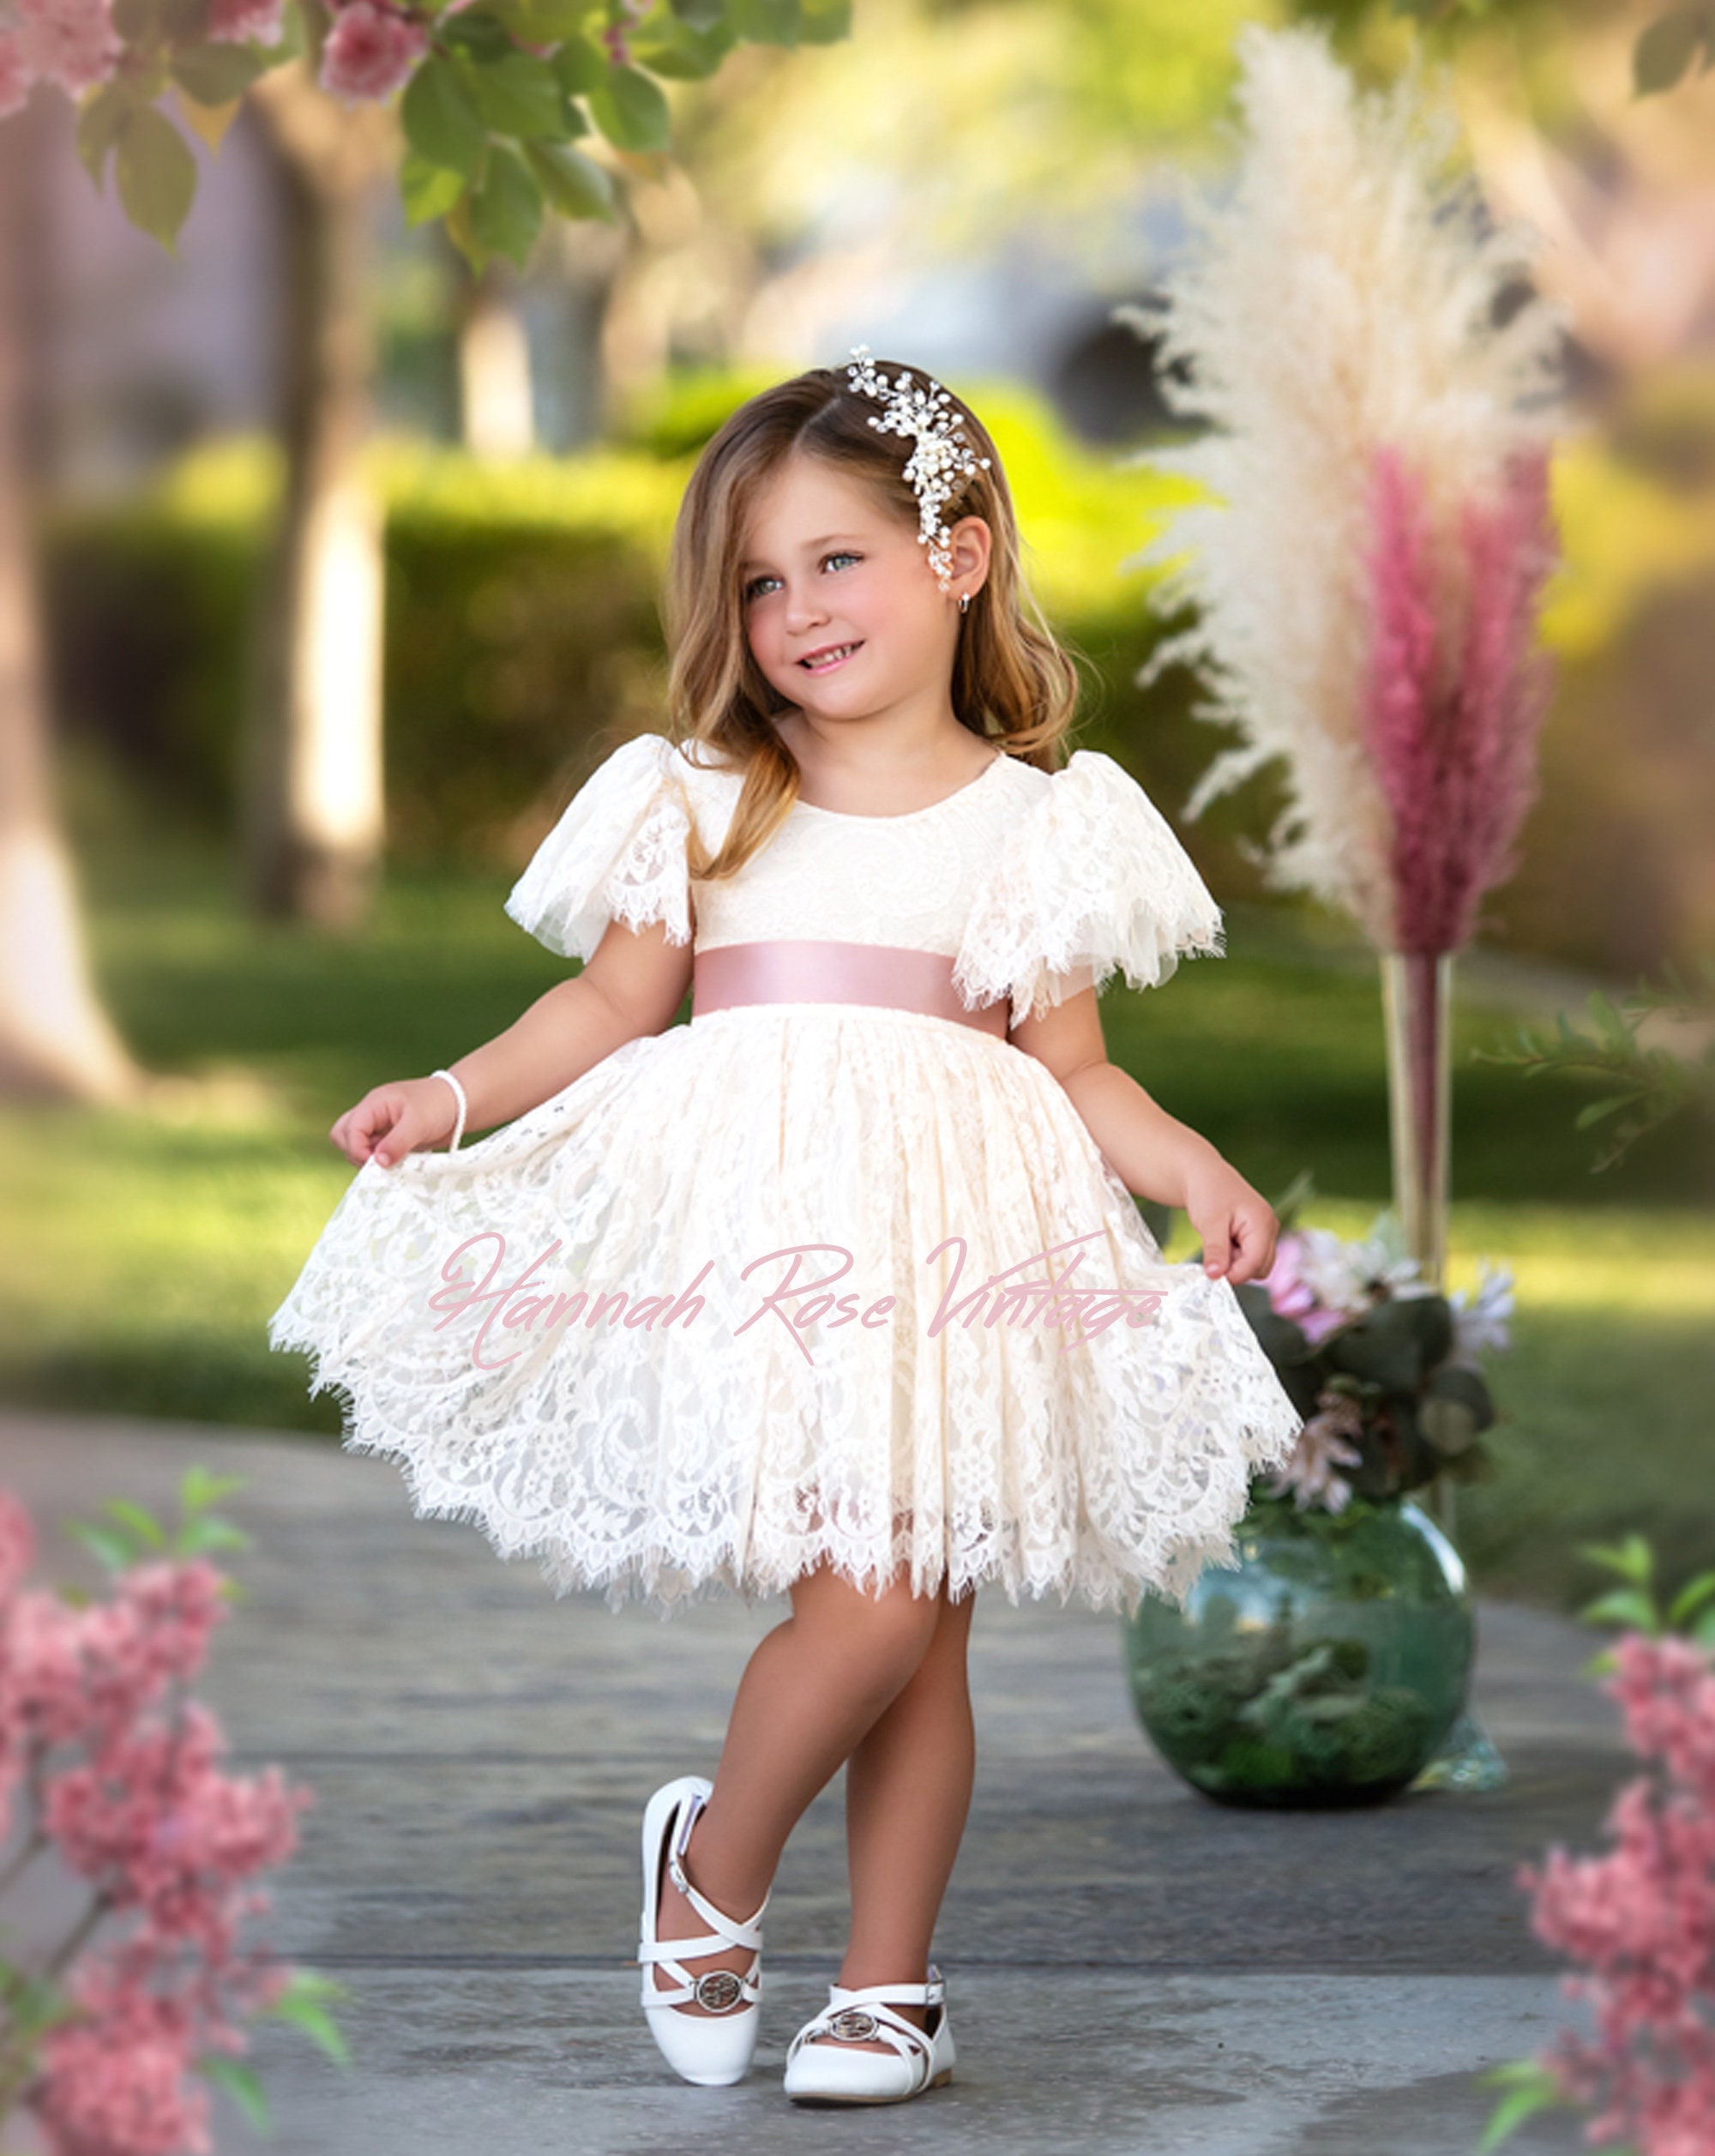 Knee Length Flower Girl Dress White or Ivory Lace Rustic - Etsy